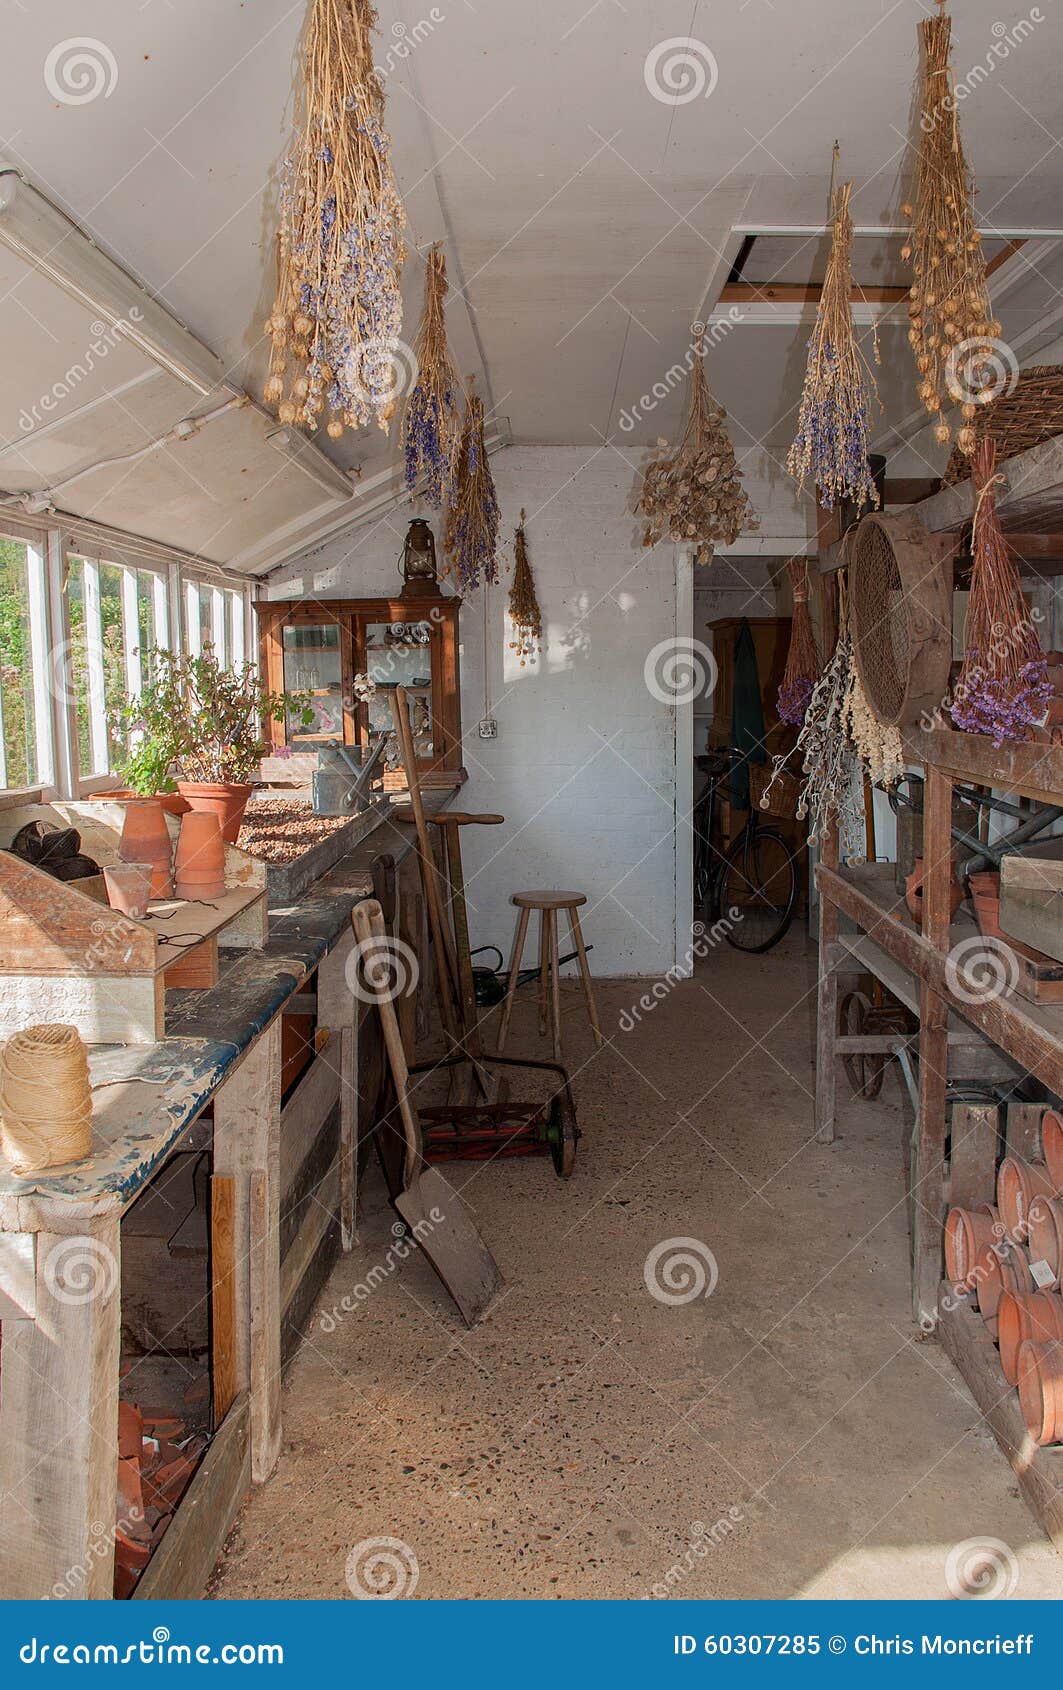 polesden lacey potting shed